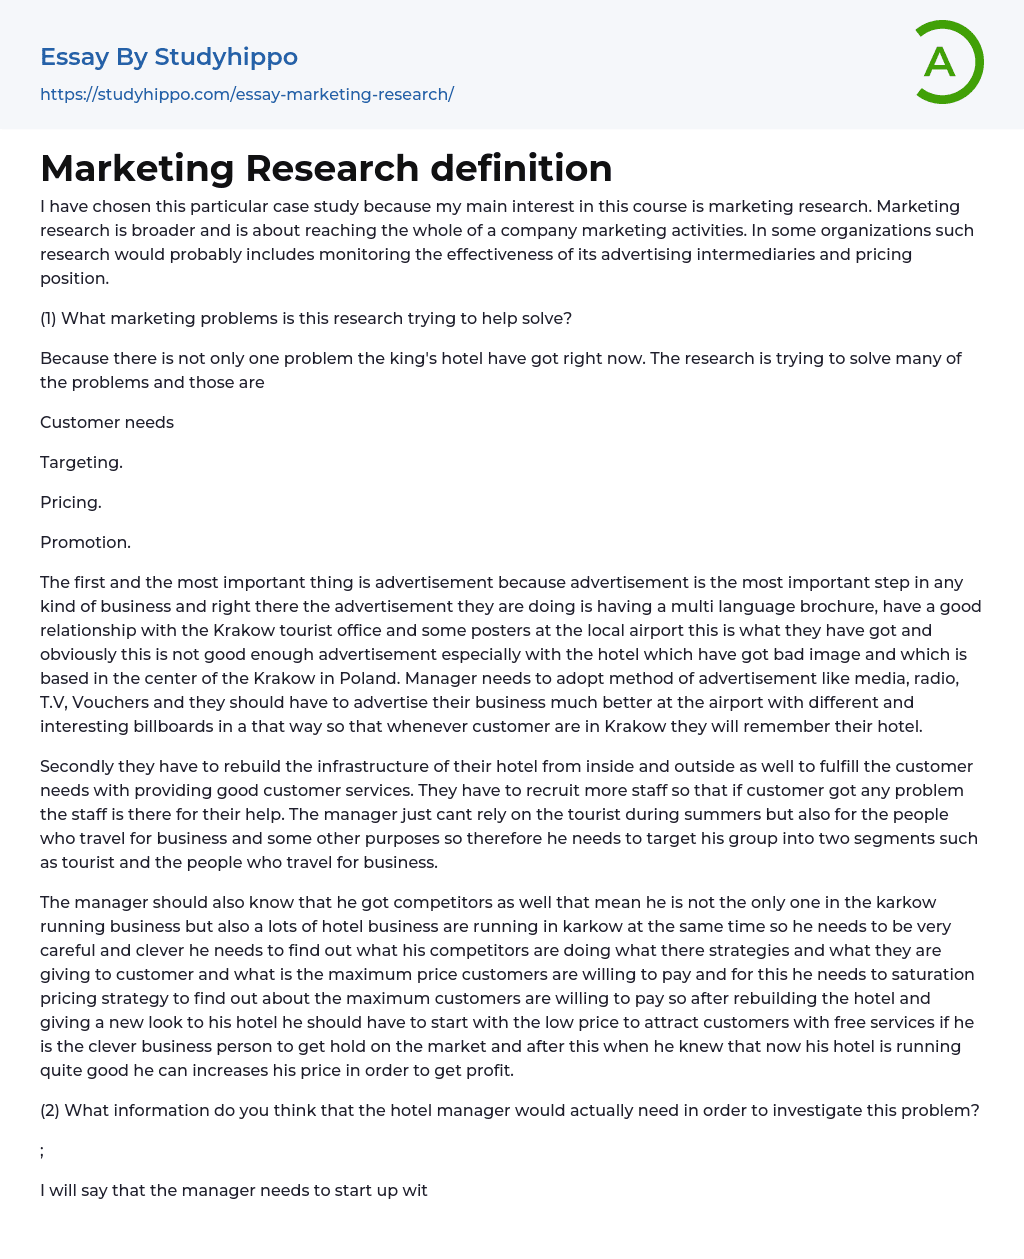 Marketing Research definition Essay Example